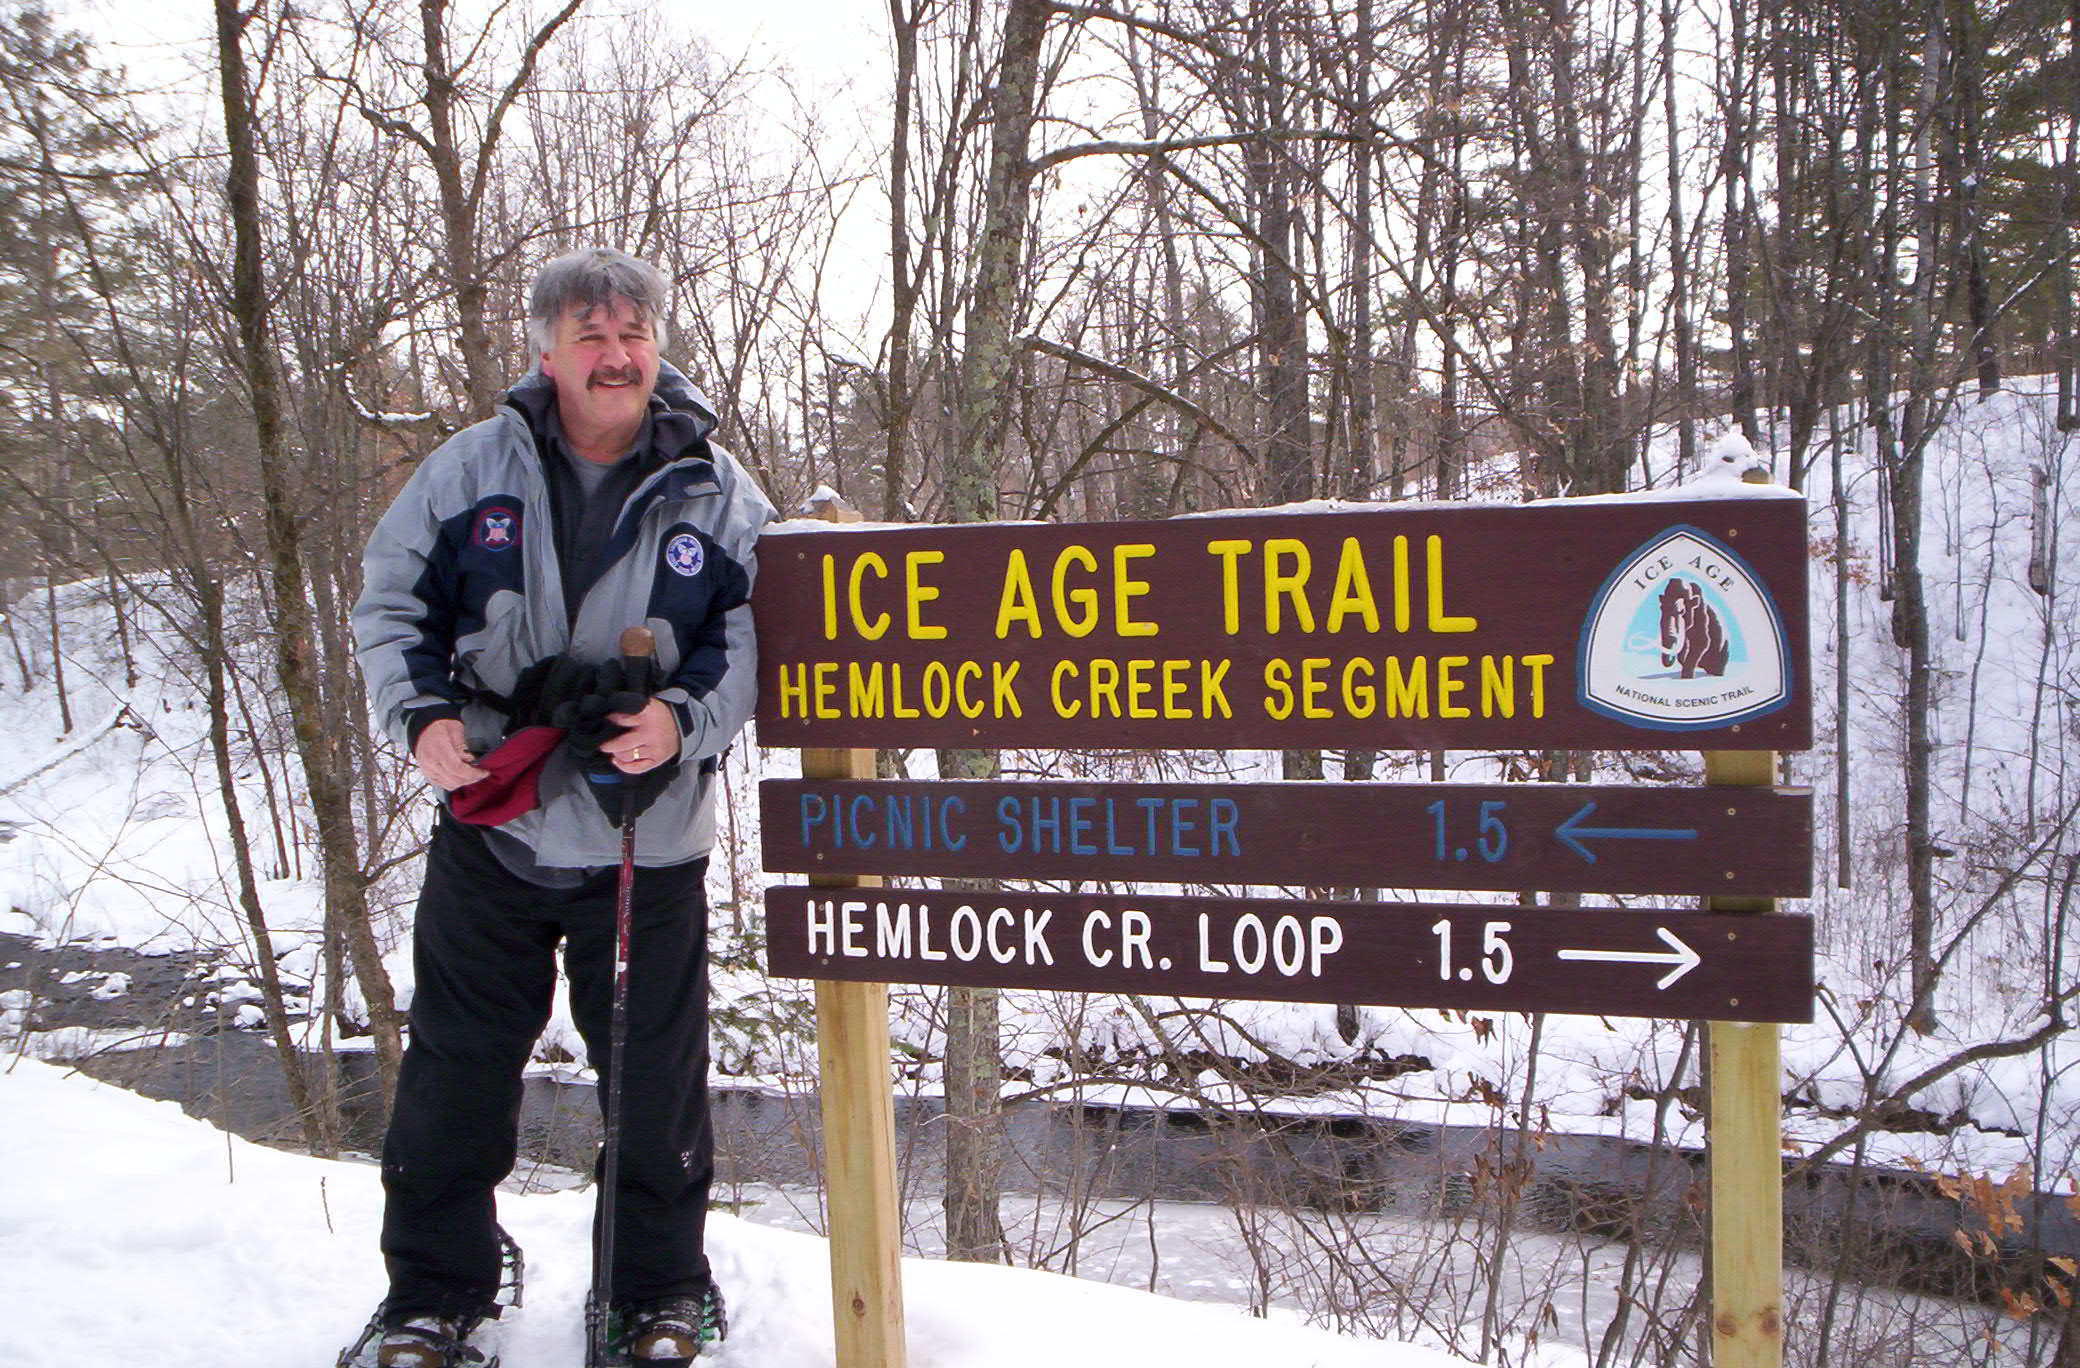 snowshoe Ice Age Trail: man with snowshoes near trail sign